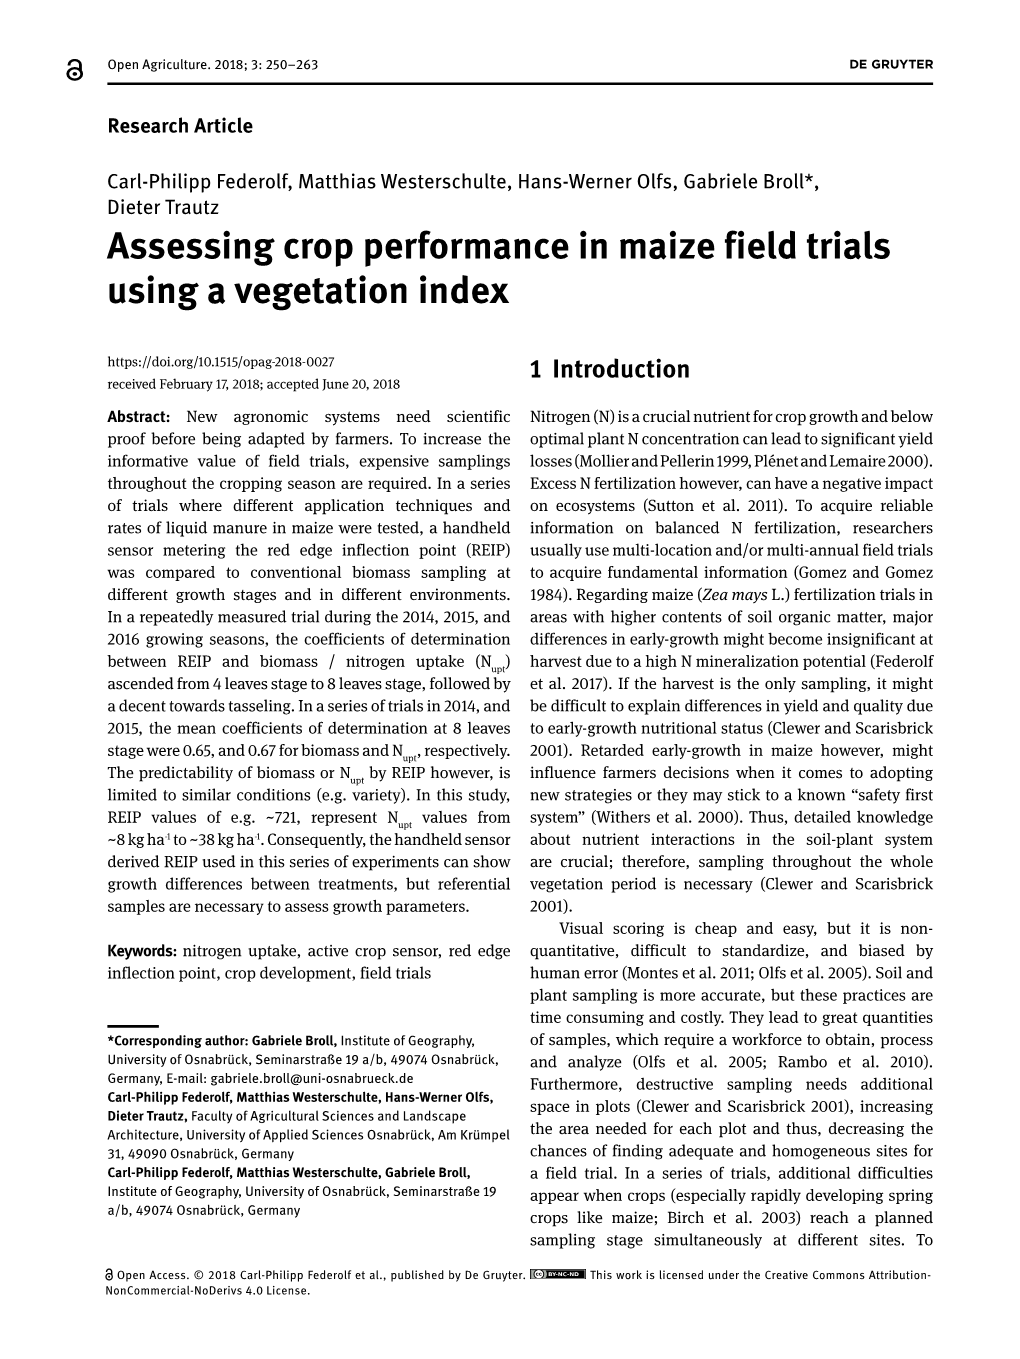 Assessing Crop Performance in Maize Field Trials Using a Vegetation Index